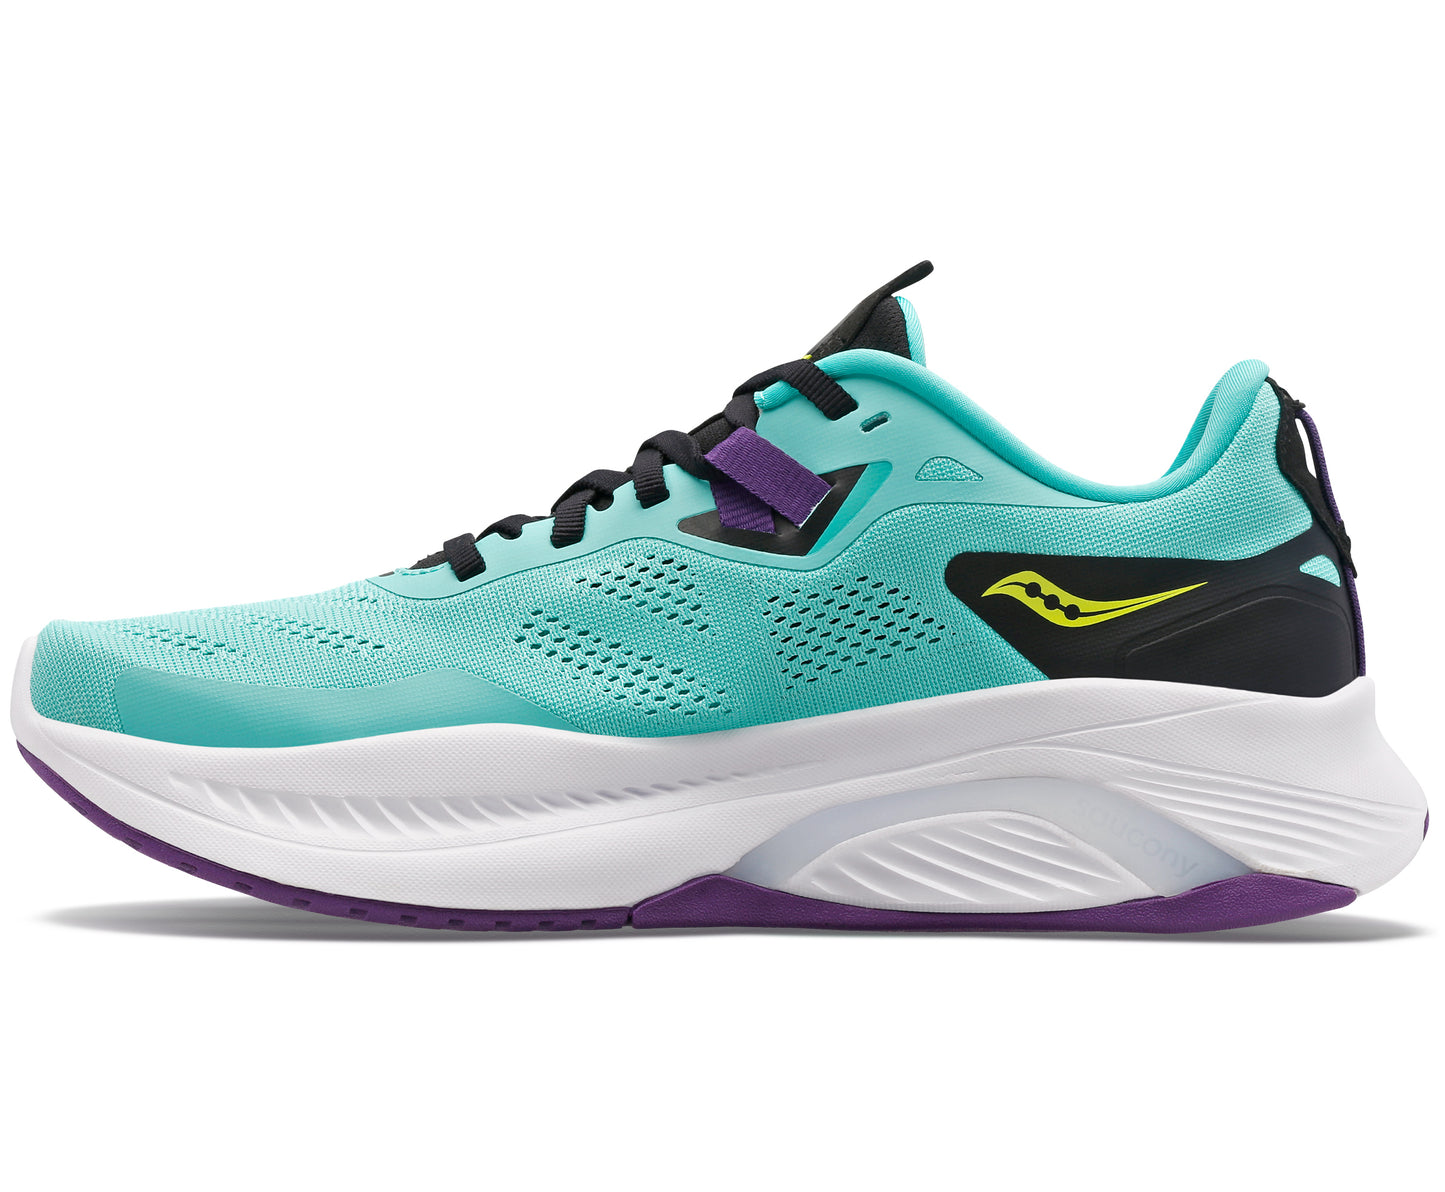 Saucony Guide 15 Women's stability running shoe turquoise, black, and white